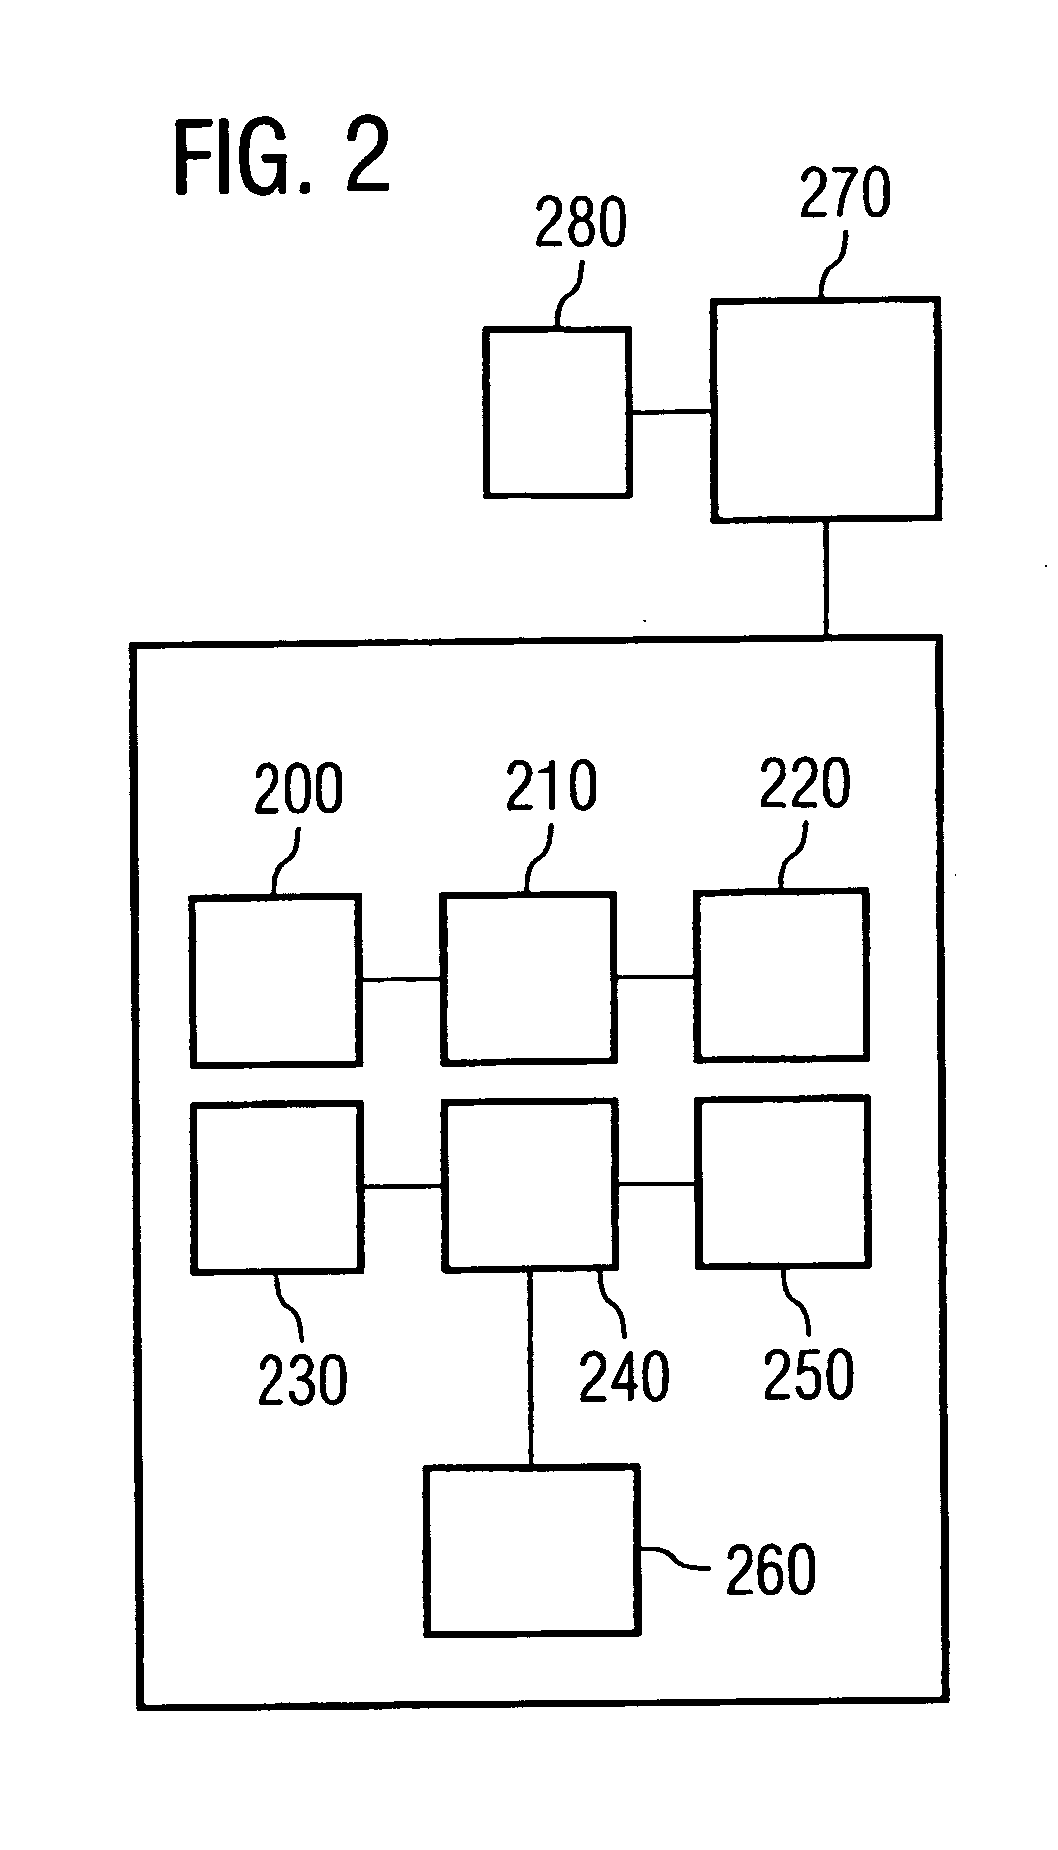 Operationg of a switching node in a communications network comprising both a layered and a non-layered architectural environment